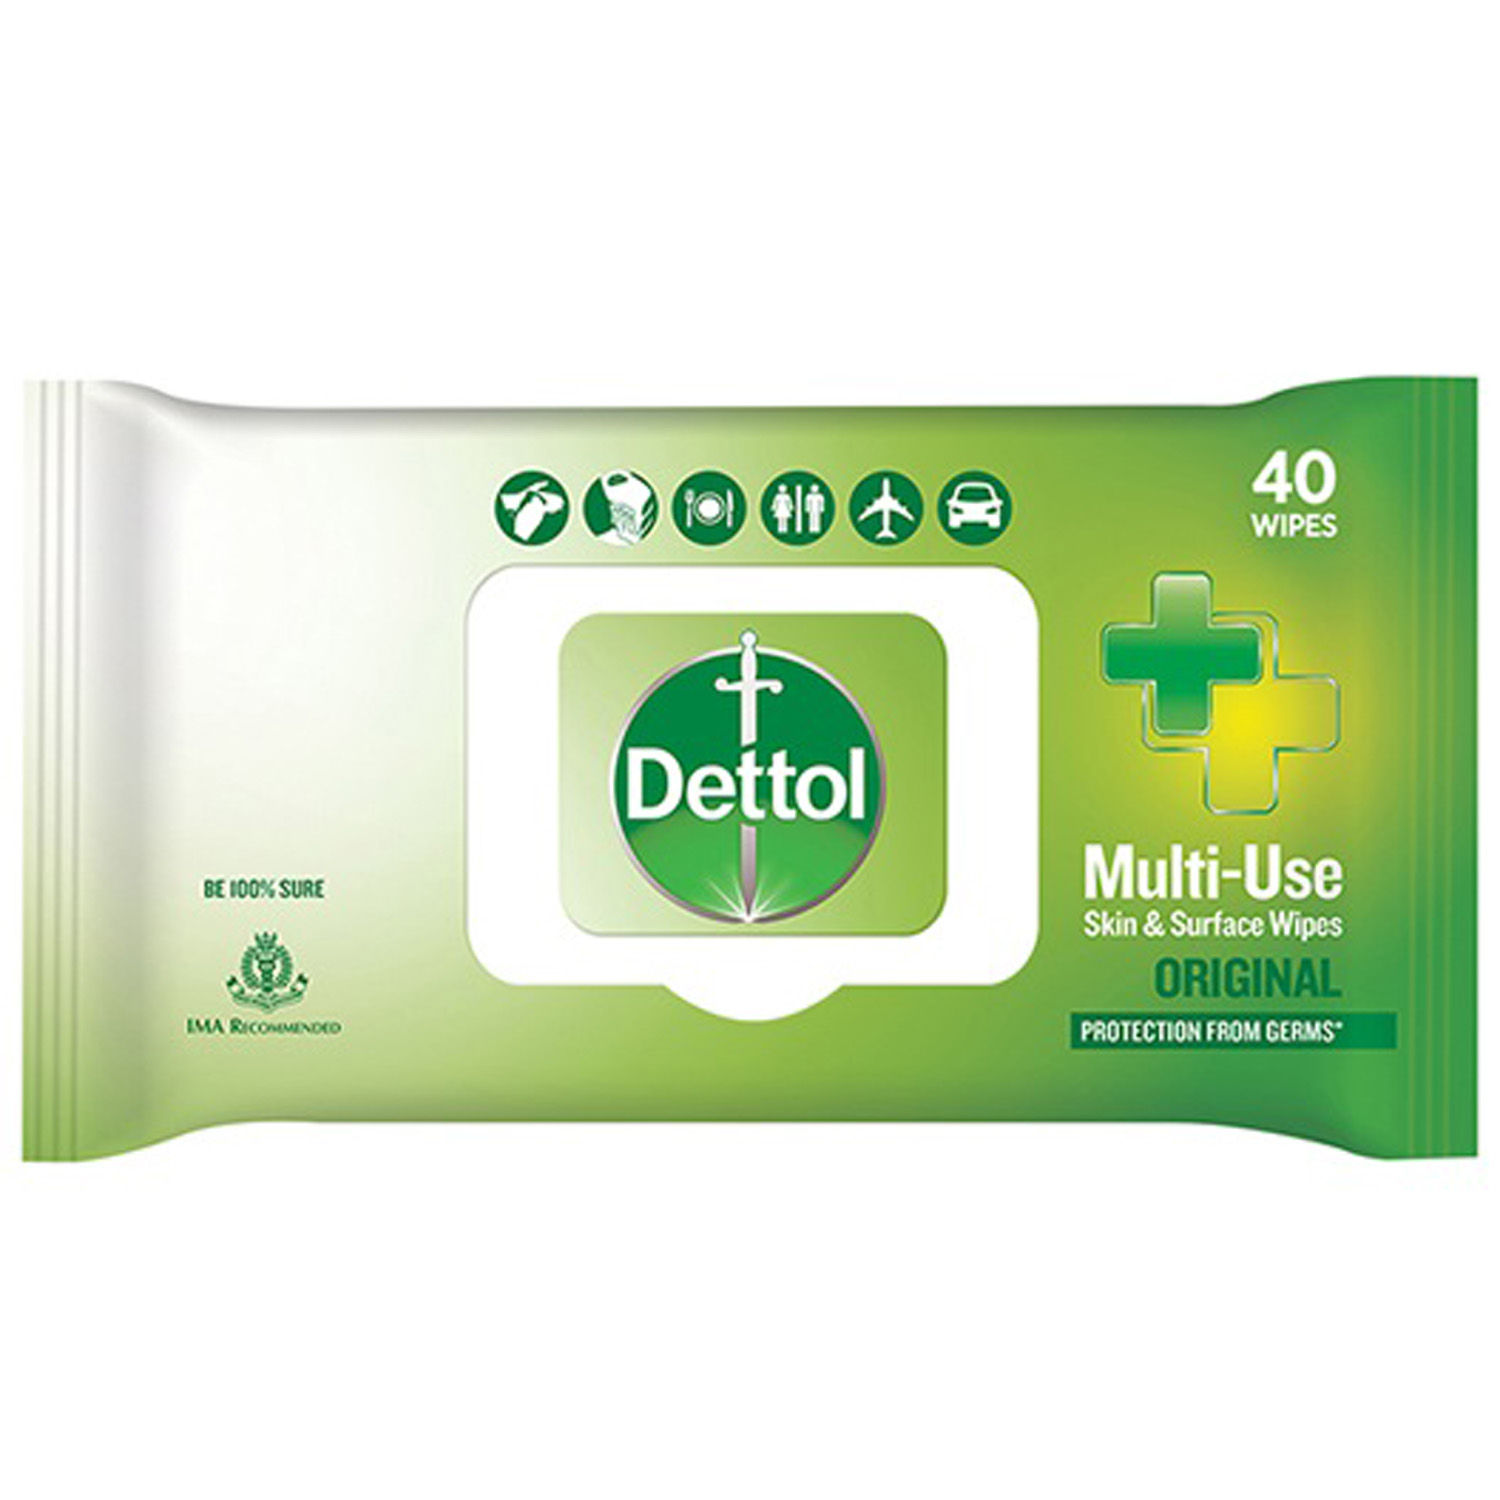 Dettol Original Multi-Use Skin & Surface Wipes, 40 Count, Pack of 1 